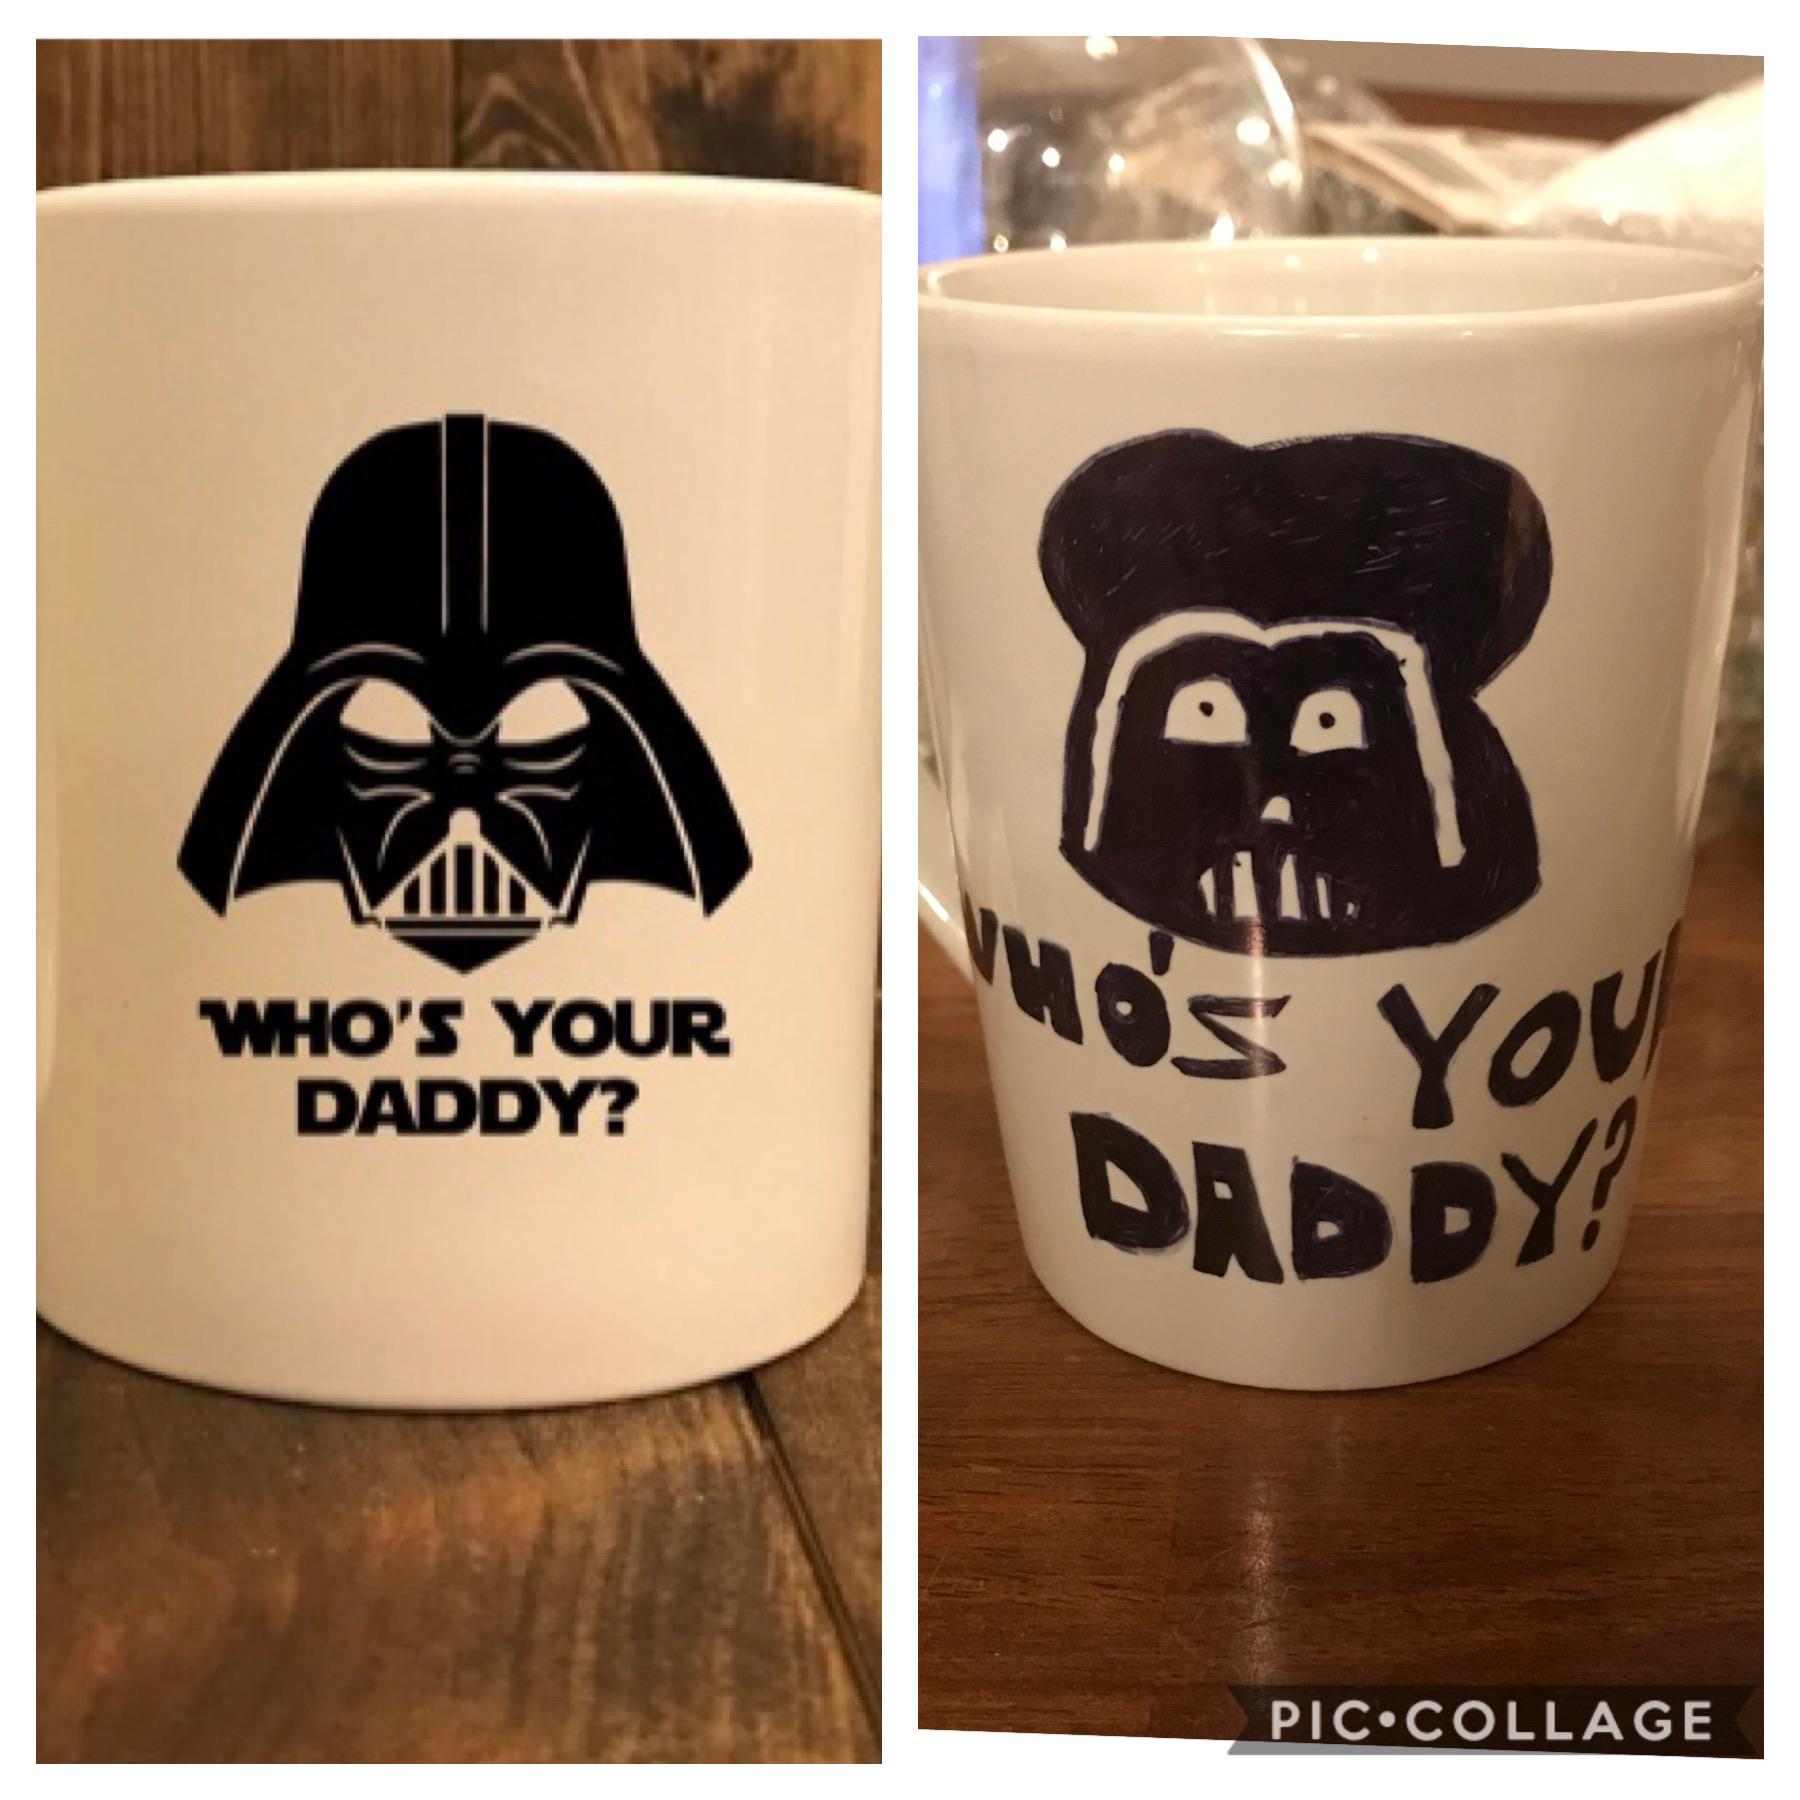 coffee cup - Who'S Your Daddy? Nos You Daddy! Pic.Collage